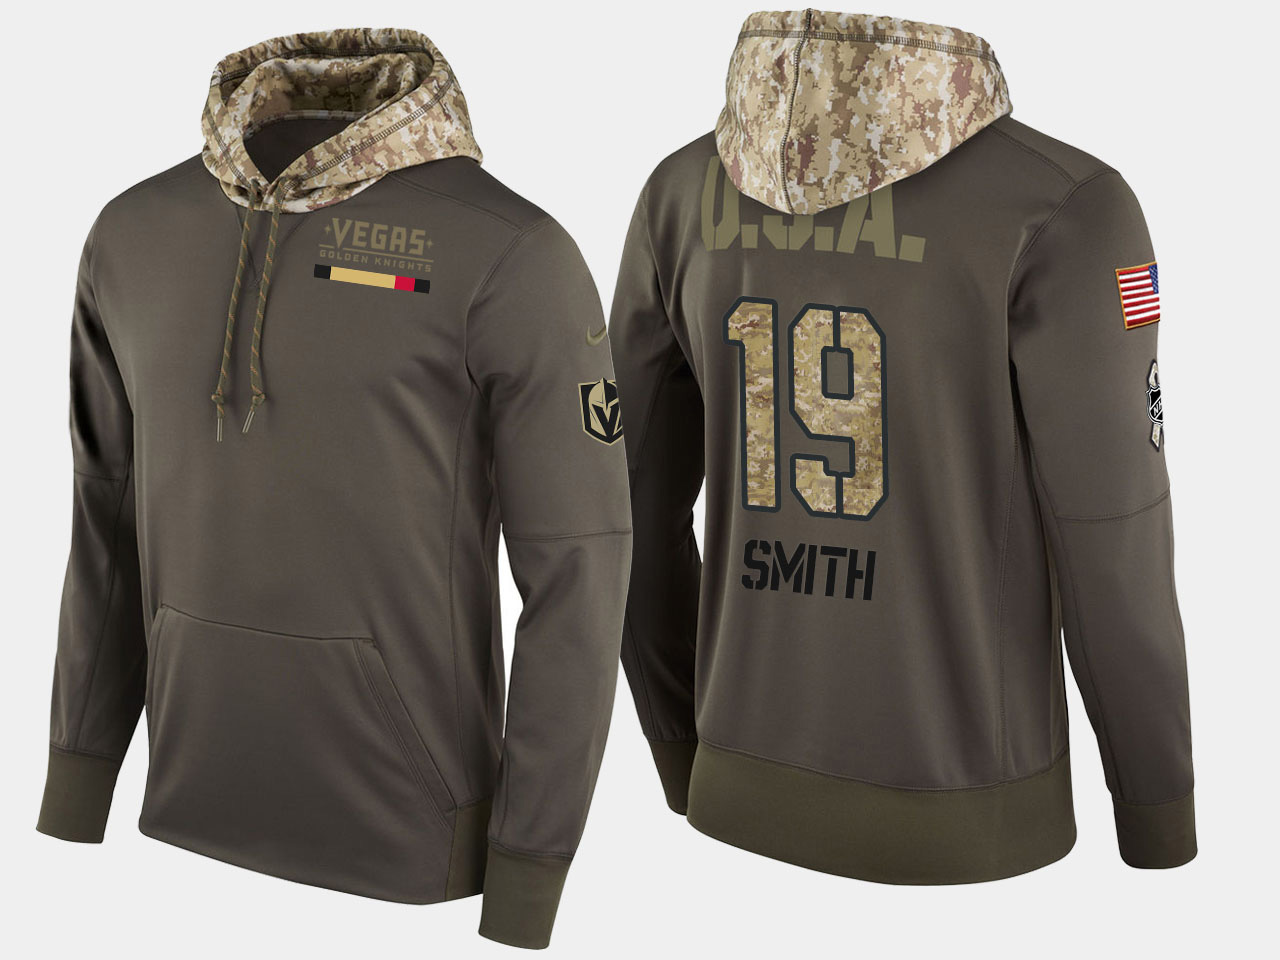 Nike Vegas Golden Knights 19 Reilly Smith Olive Salute To Service Pullover Hoodie